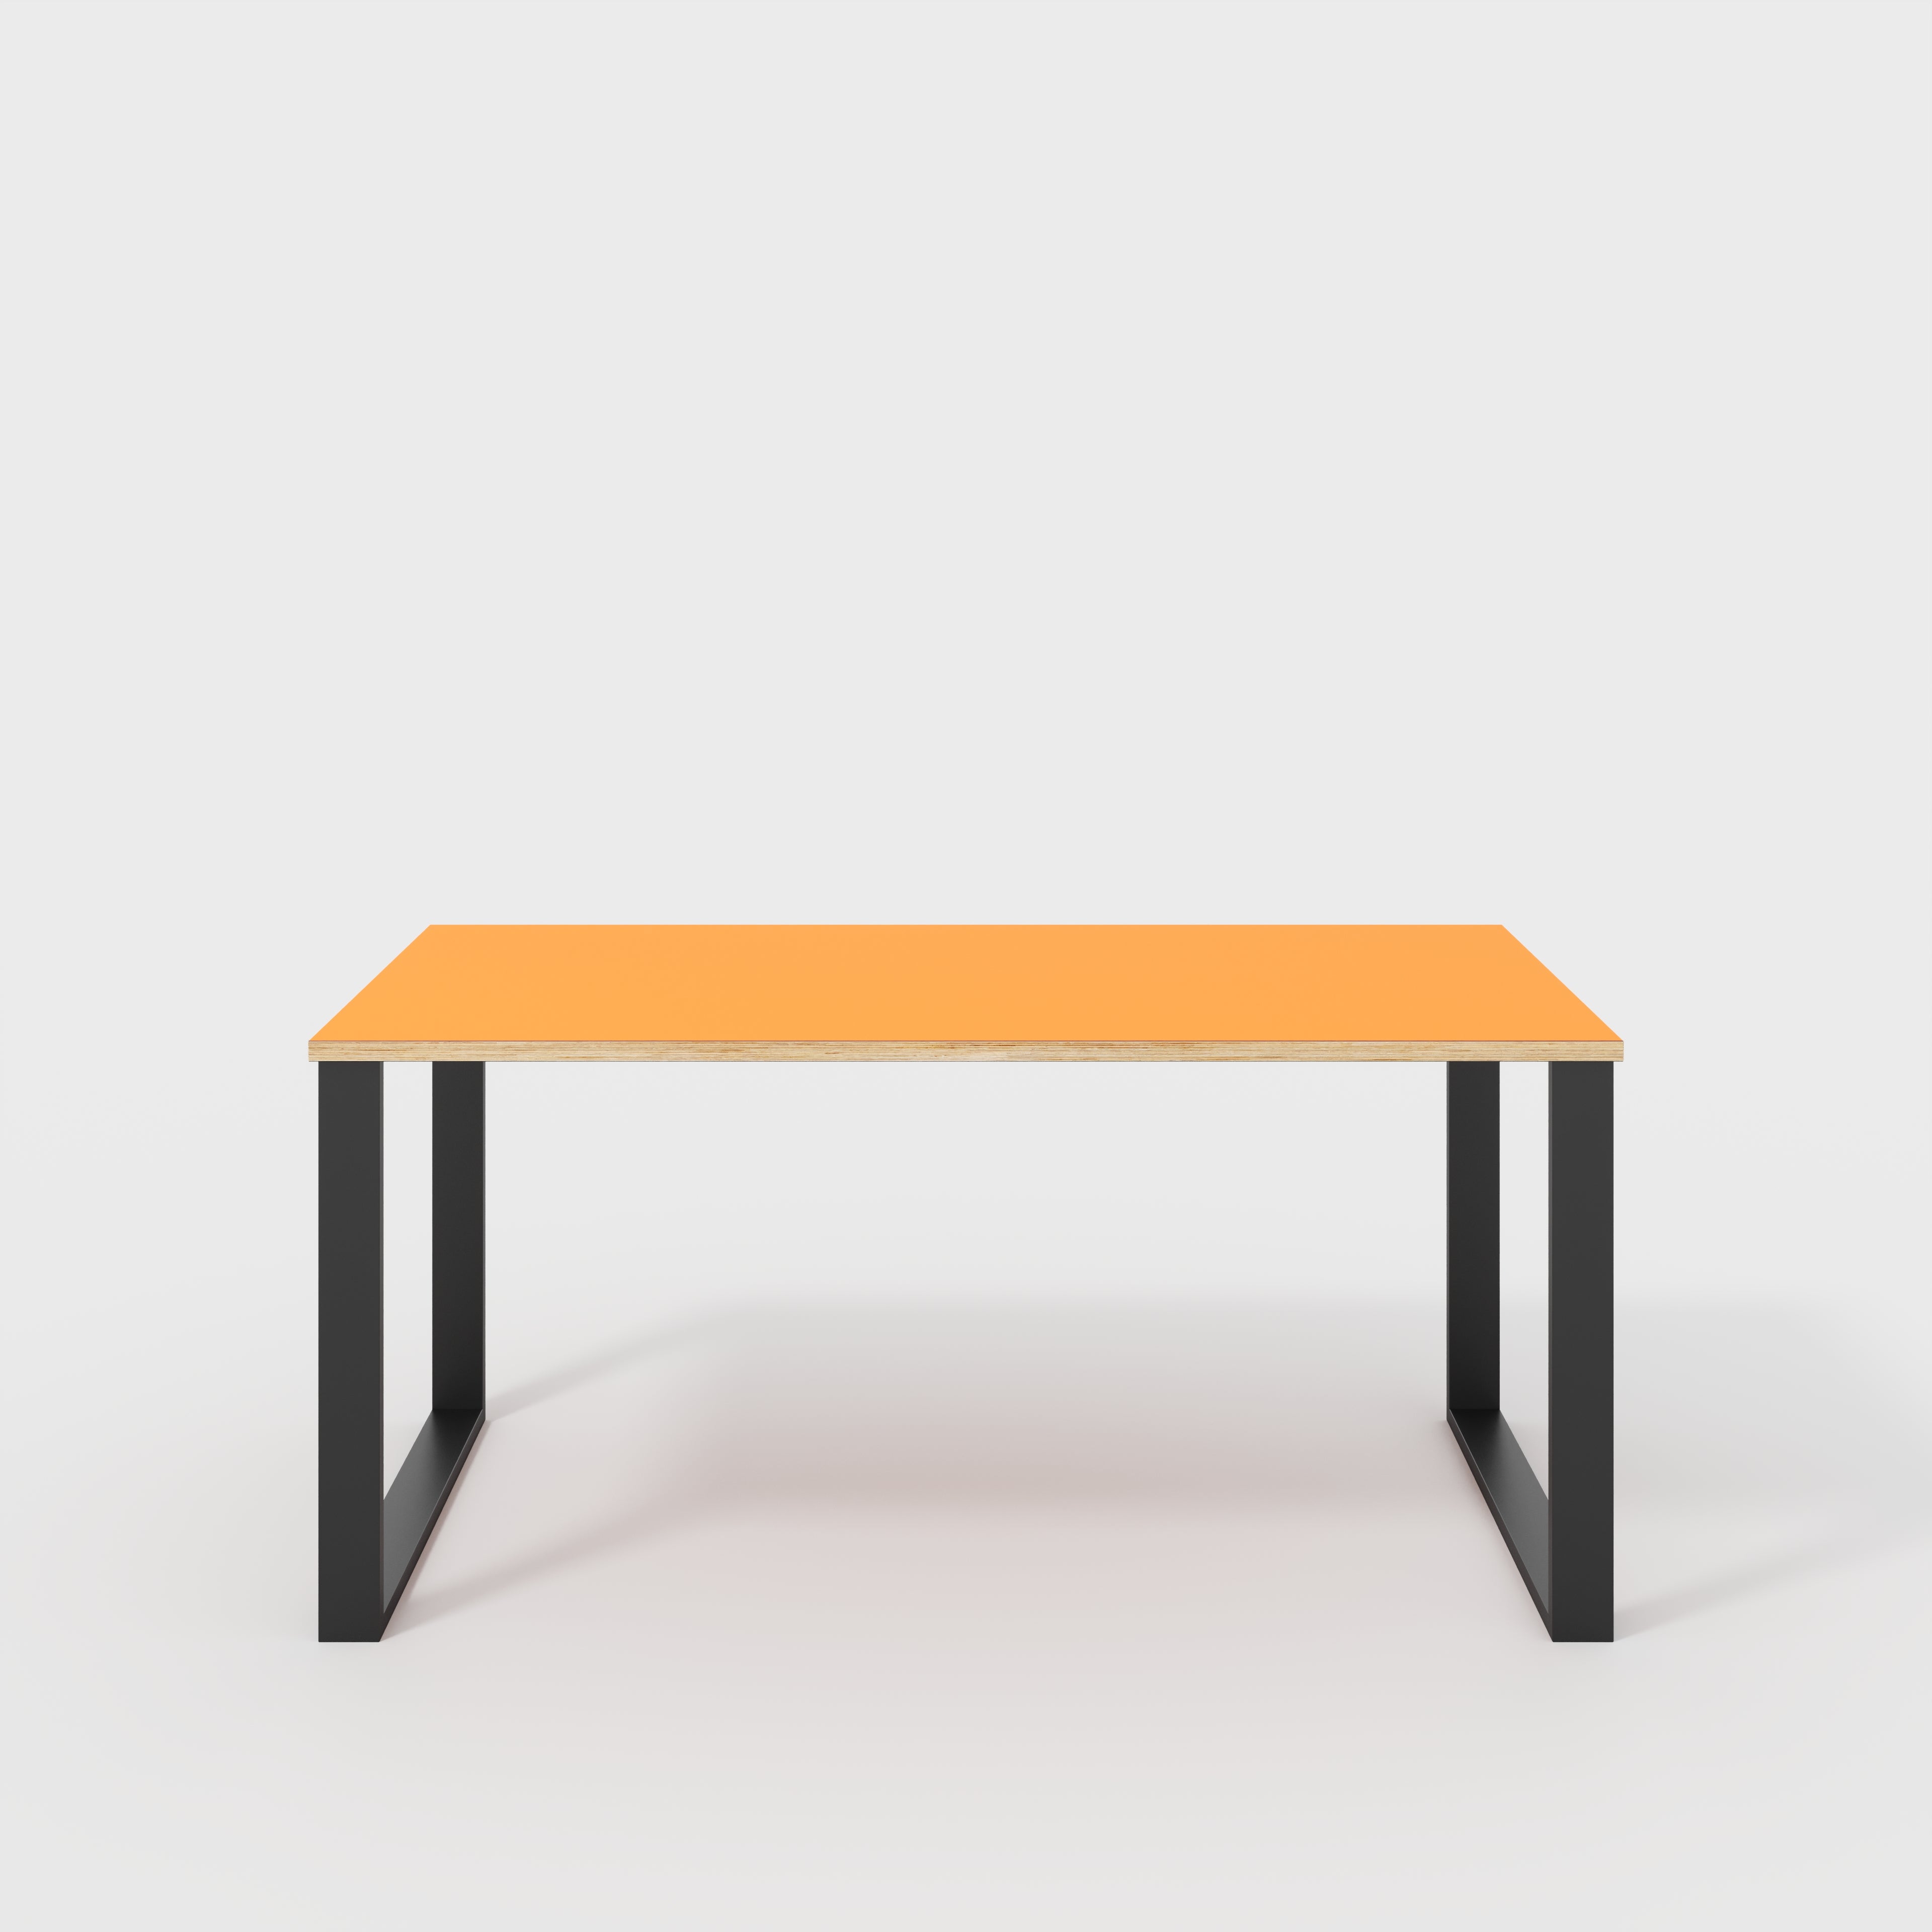 Table with Black Industrial Legs - Formica Levante Orange - 1600(w) x 800(d)